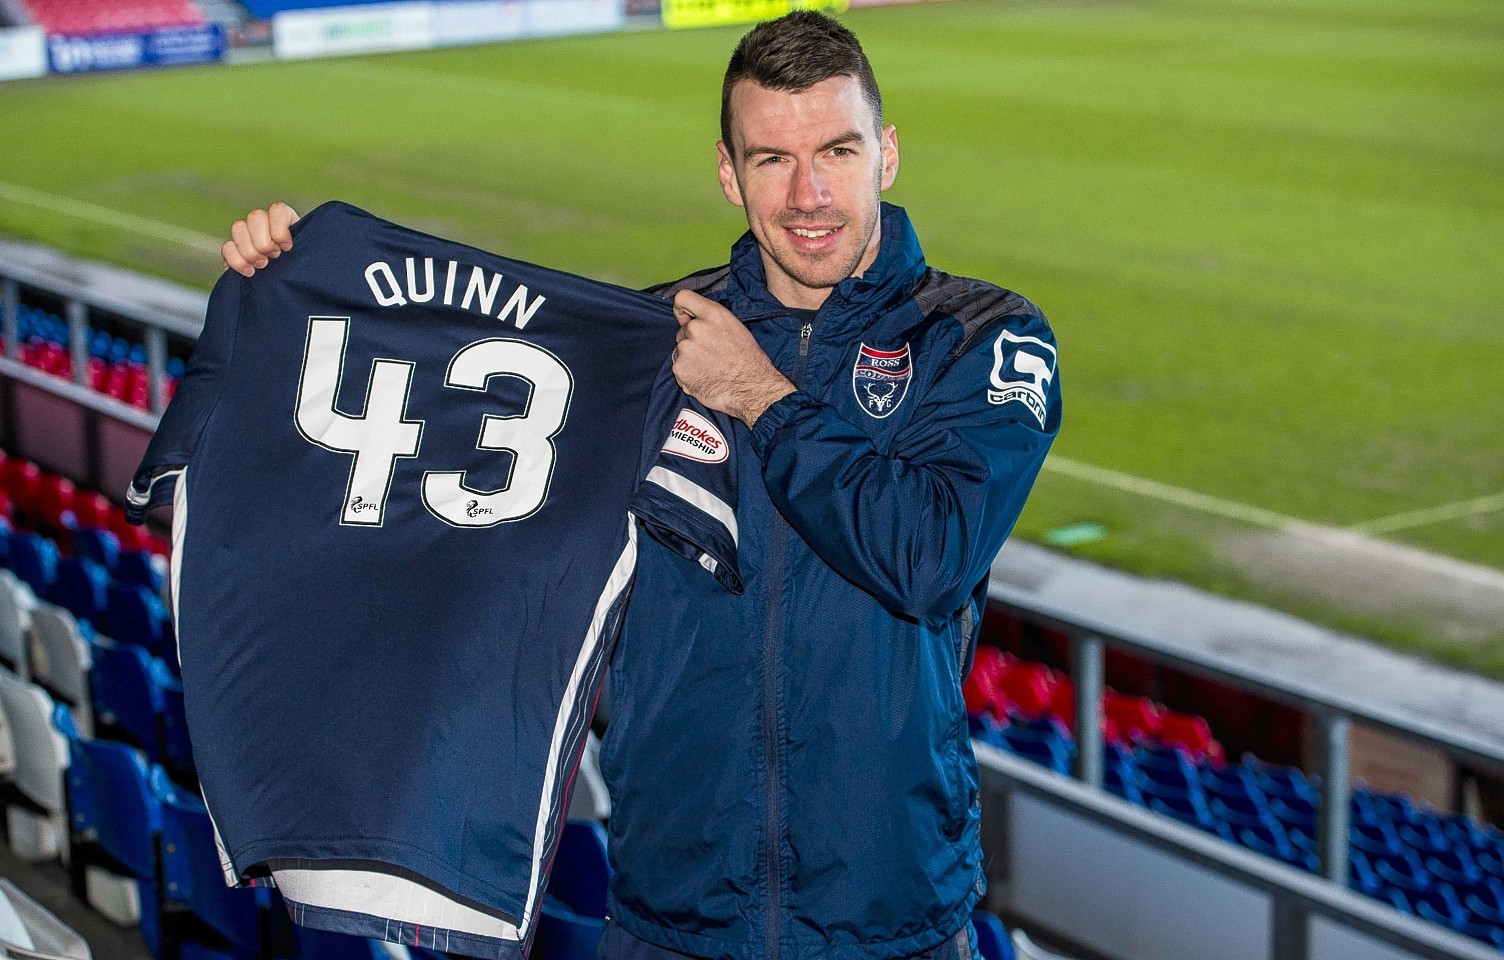 Paul Quinn No regrets about Aberdeen move ahead of second Staggies debut